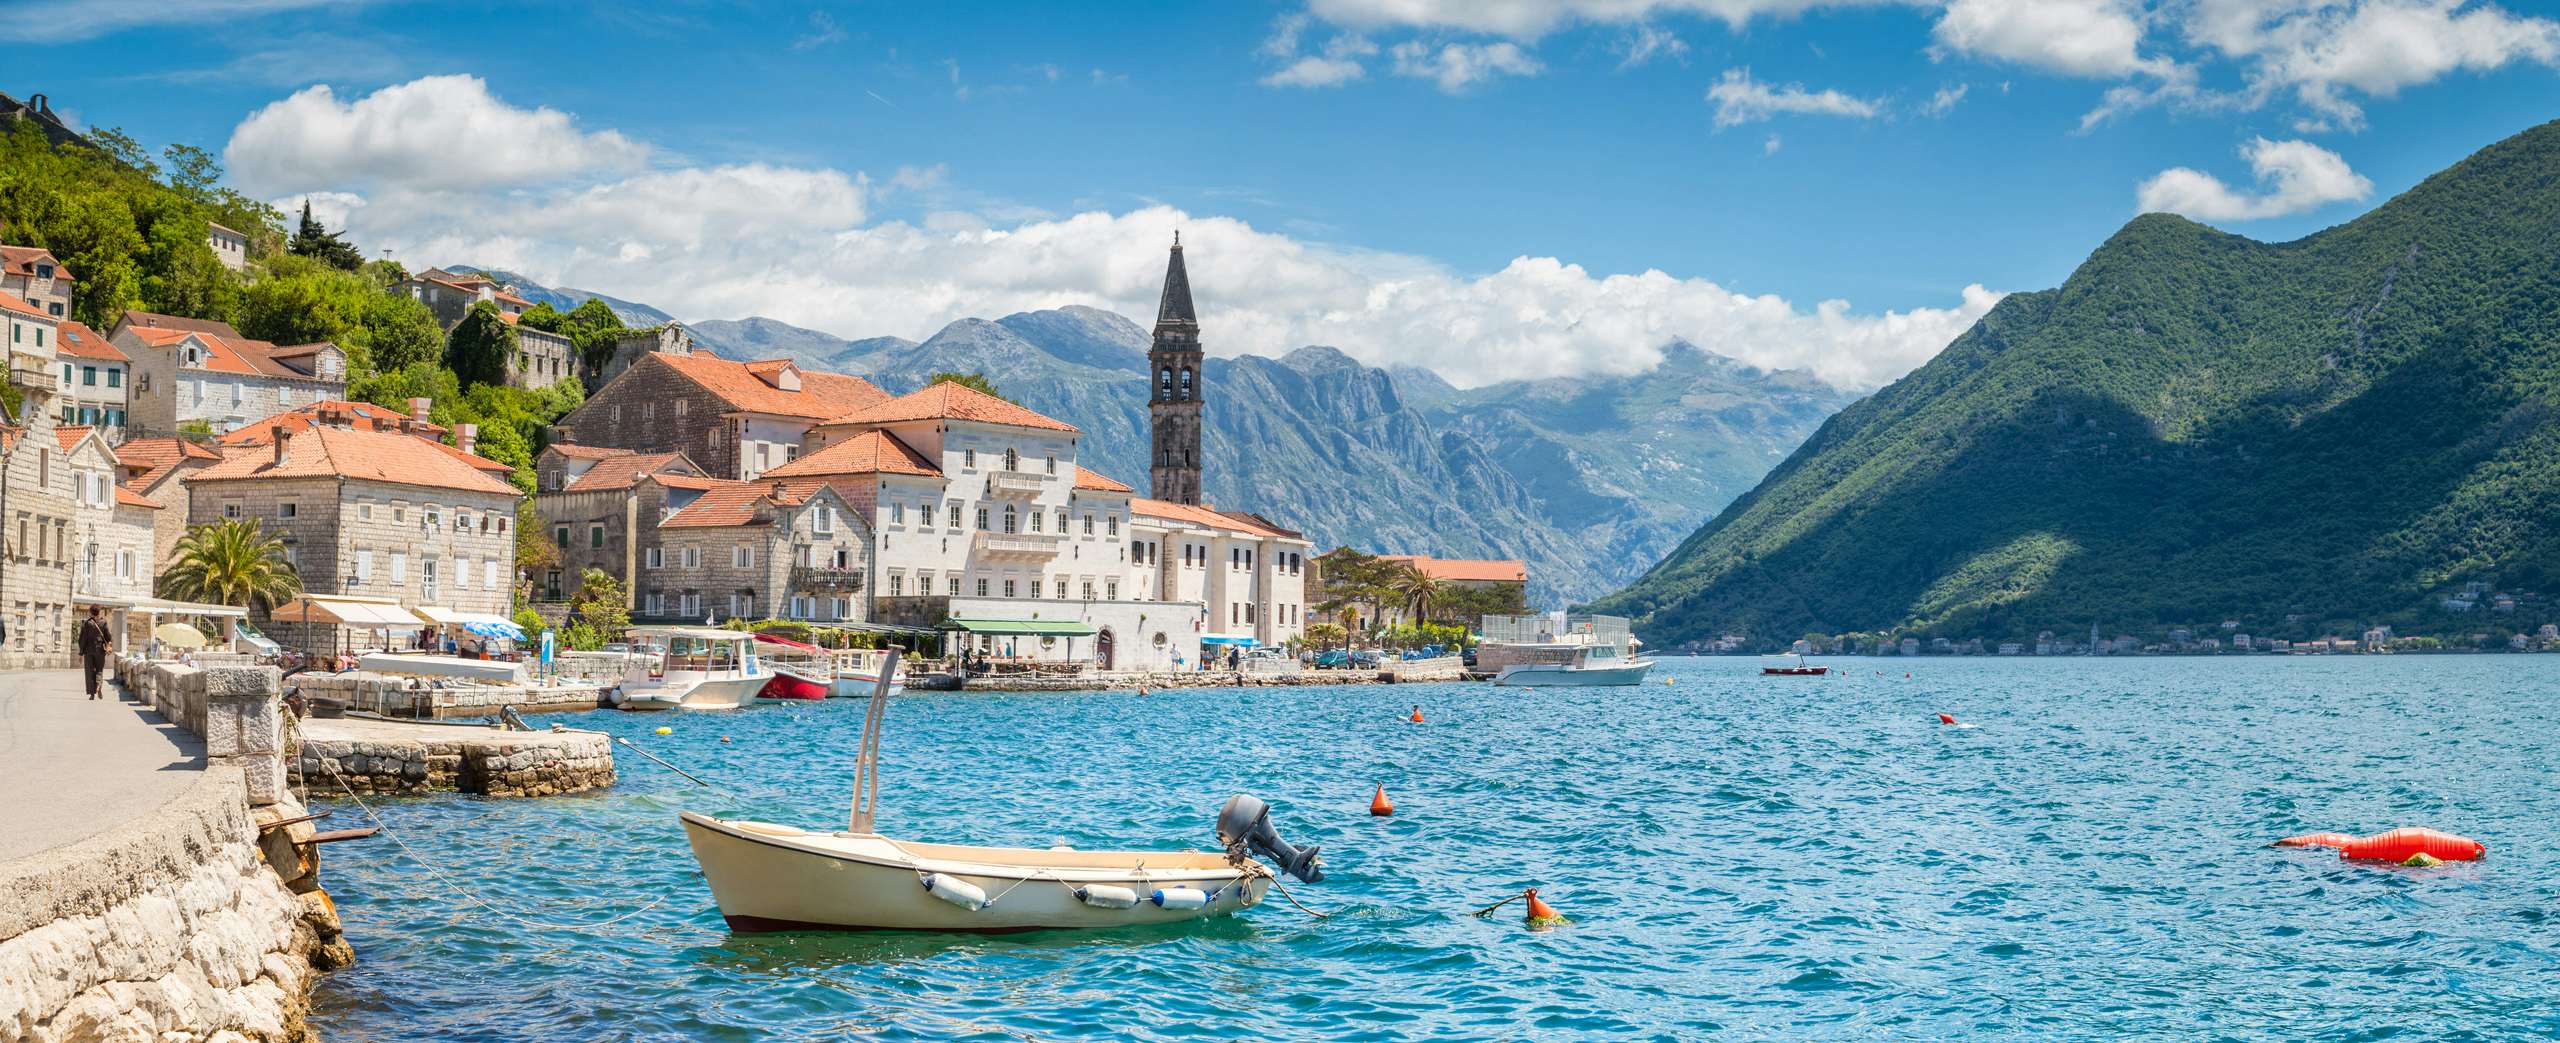 A small boat on the serene waters of Montenegro with a backdrop of mountains and historic buildings, ideal for yacht charter experiences by N&J.